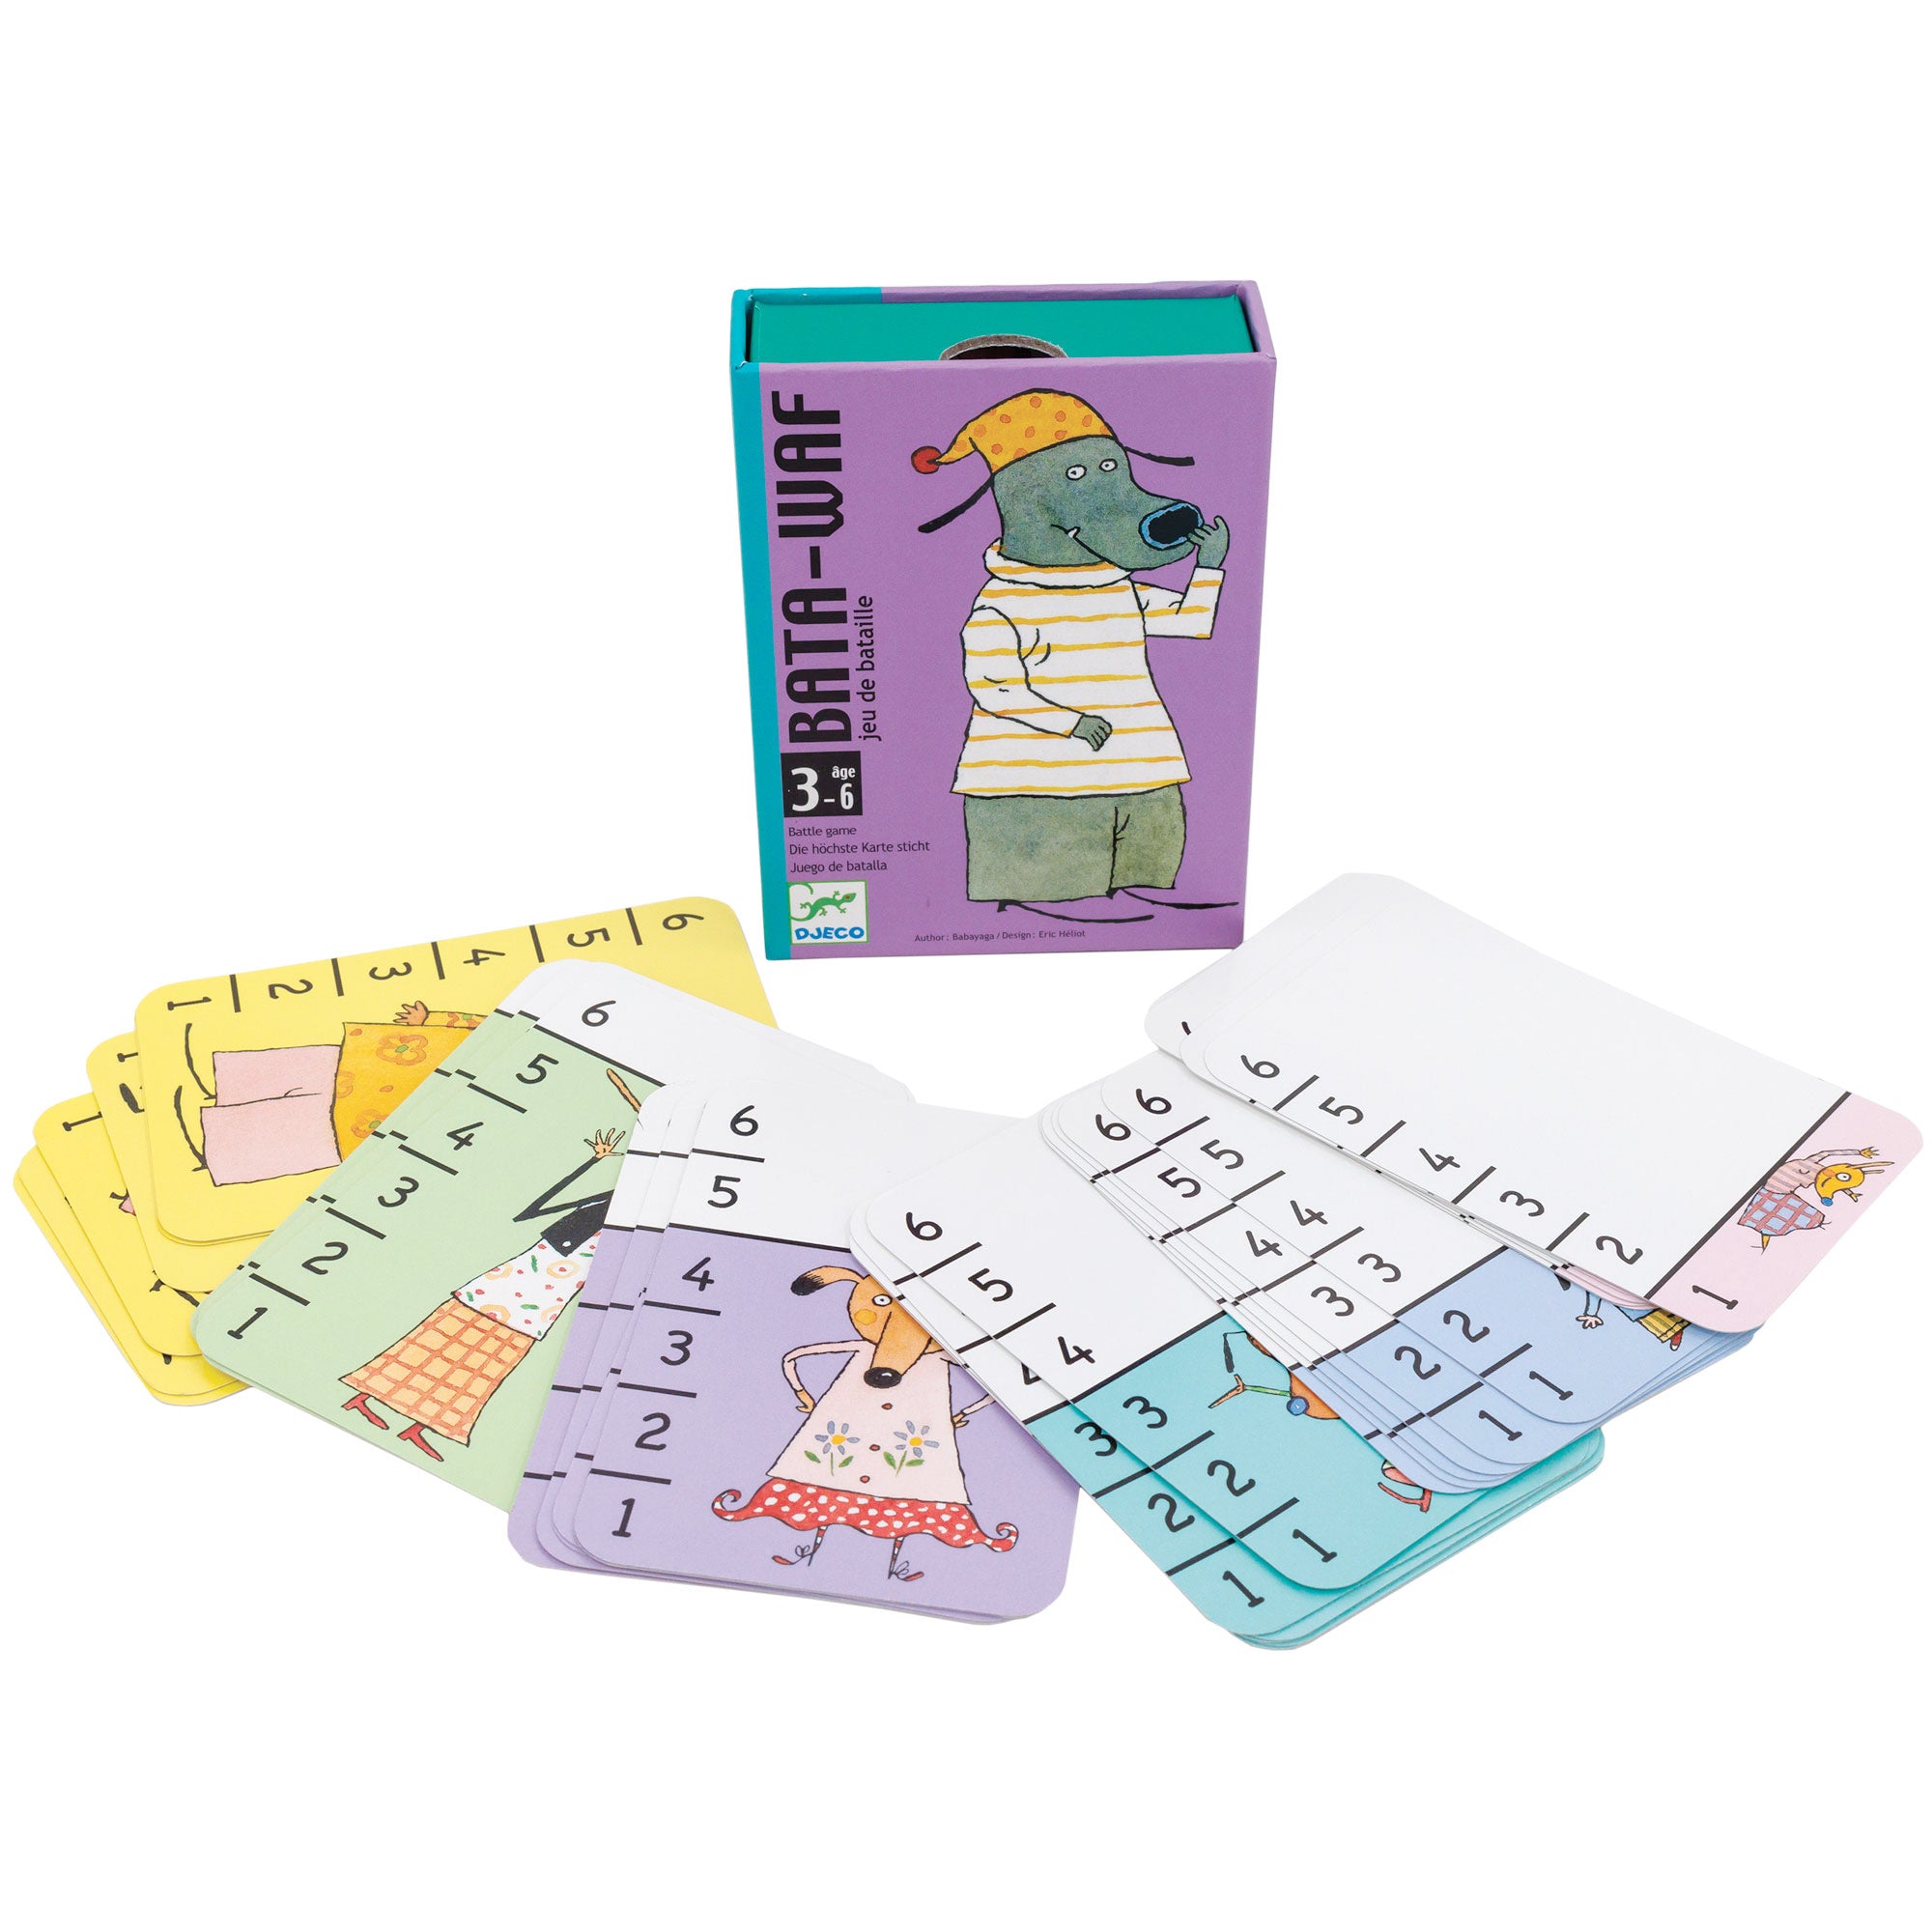 Djeco Bata-Waf card game box surrounded by cards. In the back, the card box is purple with teal sides. On the cover is a gray dog touching its’ nose. It is wearing a stocking cap, striped shirt, and gray pants. In front of the box, there are cards fanned out. They are in different colors and all have the numbers 1 through 6 on the left side going from the bottom to the top. Each animal on the card is measured by the numbers, to indicate their size.